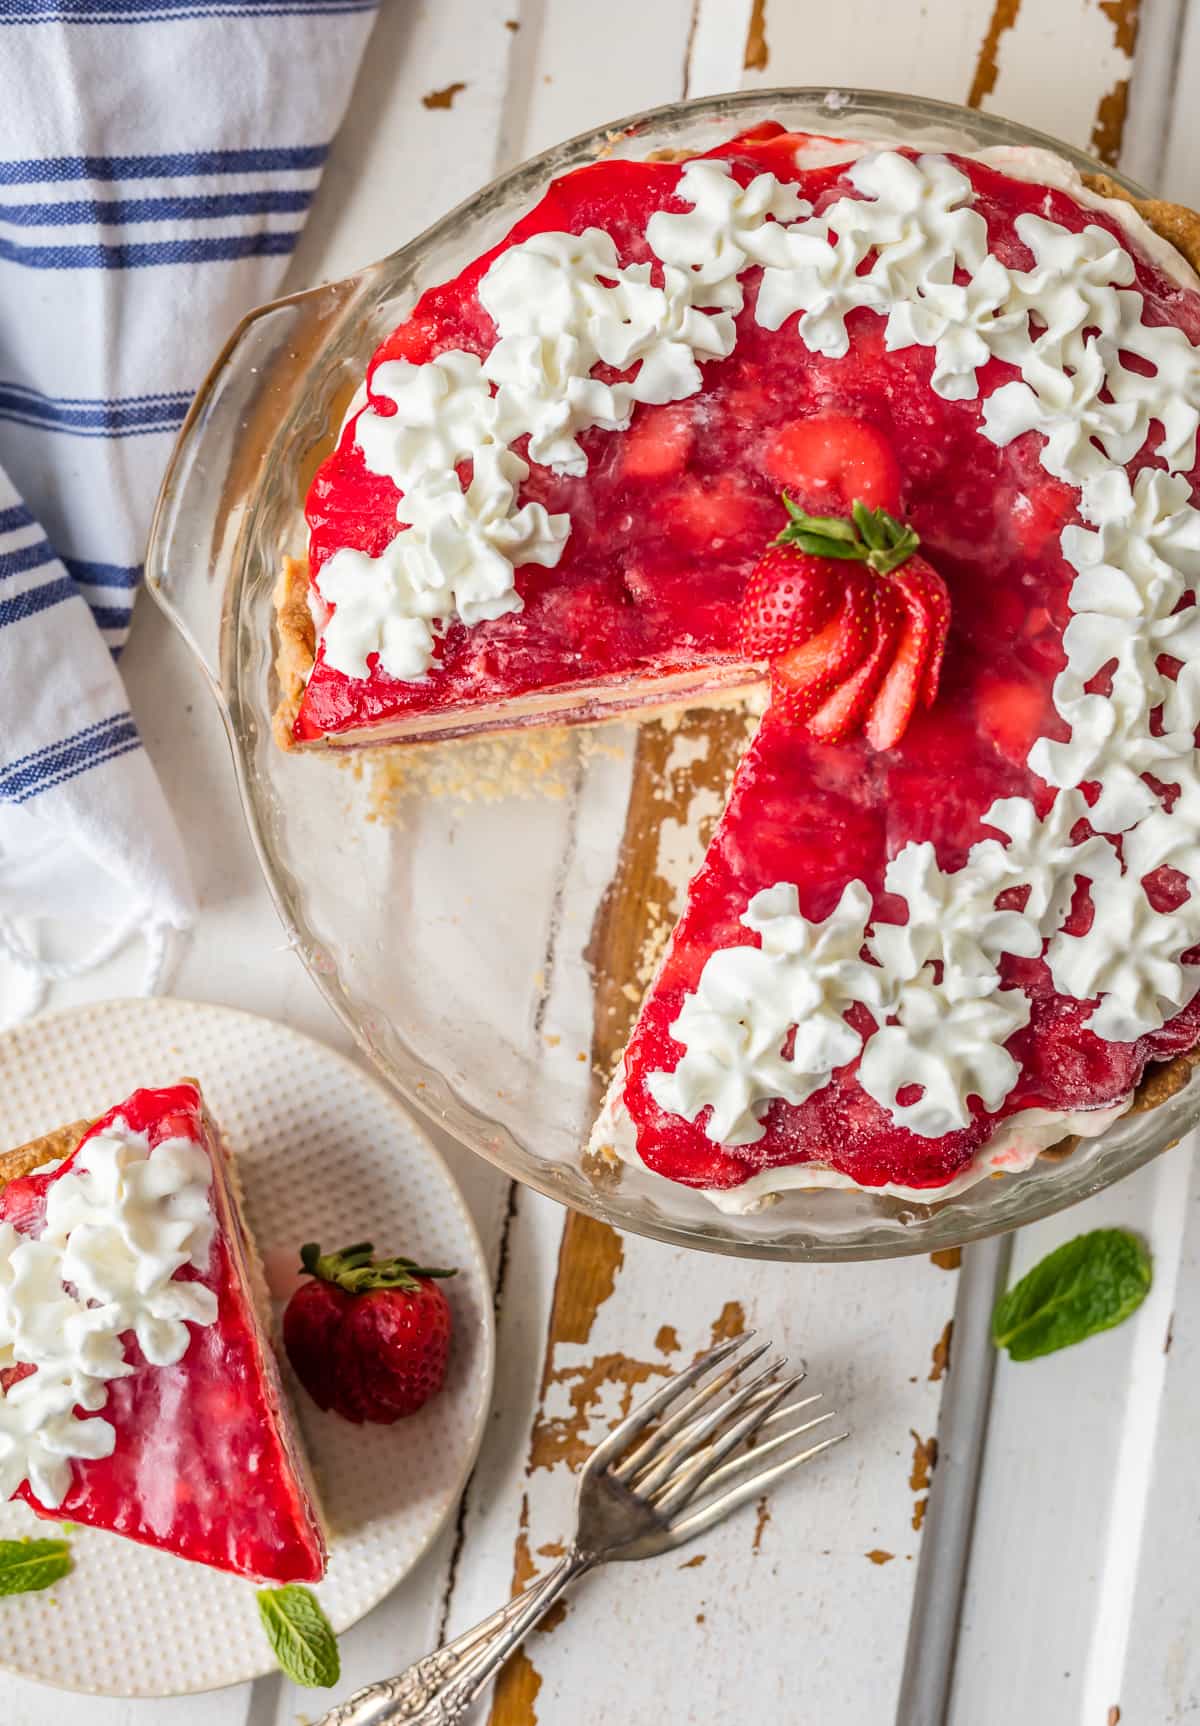 This STRAWBERRY SHORTCAKE PIE is the ultimate Summer sweet treat! Layers of strawberries, cream, and pound cake make for the most delicious (EASY) strawberry pie!